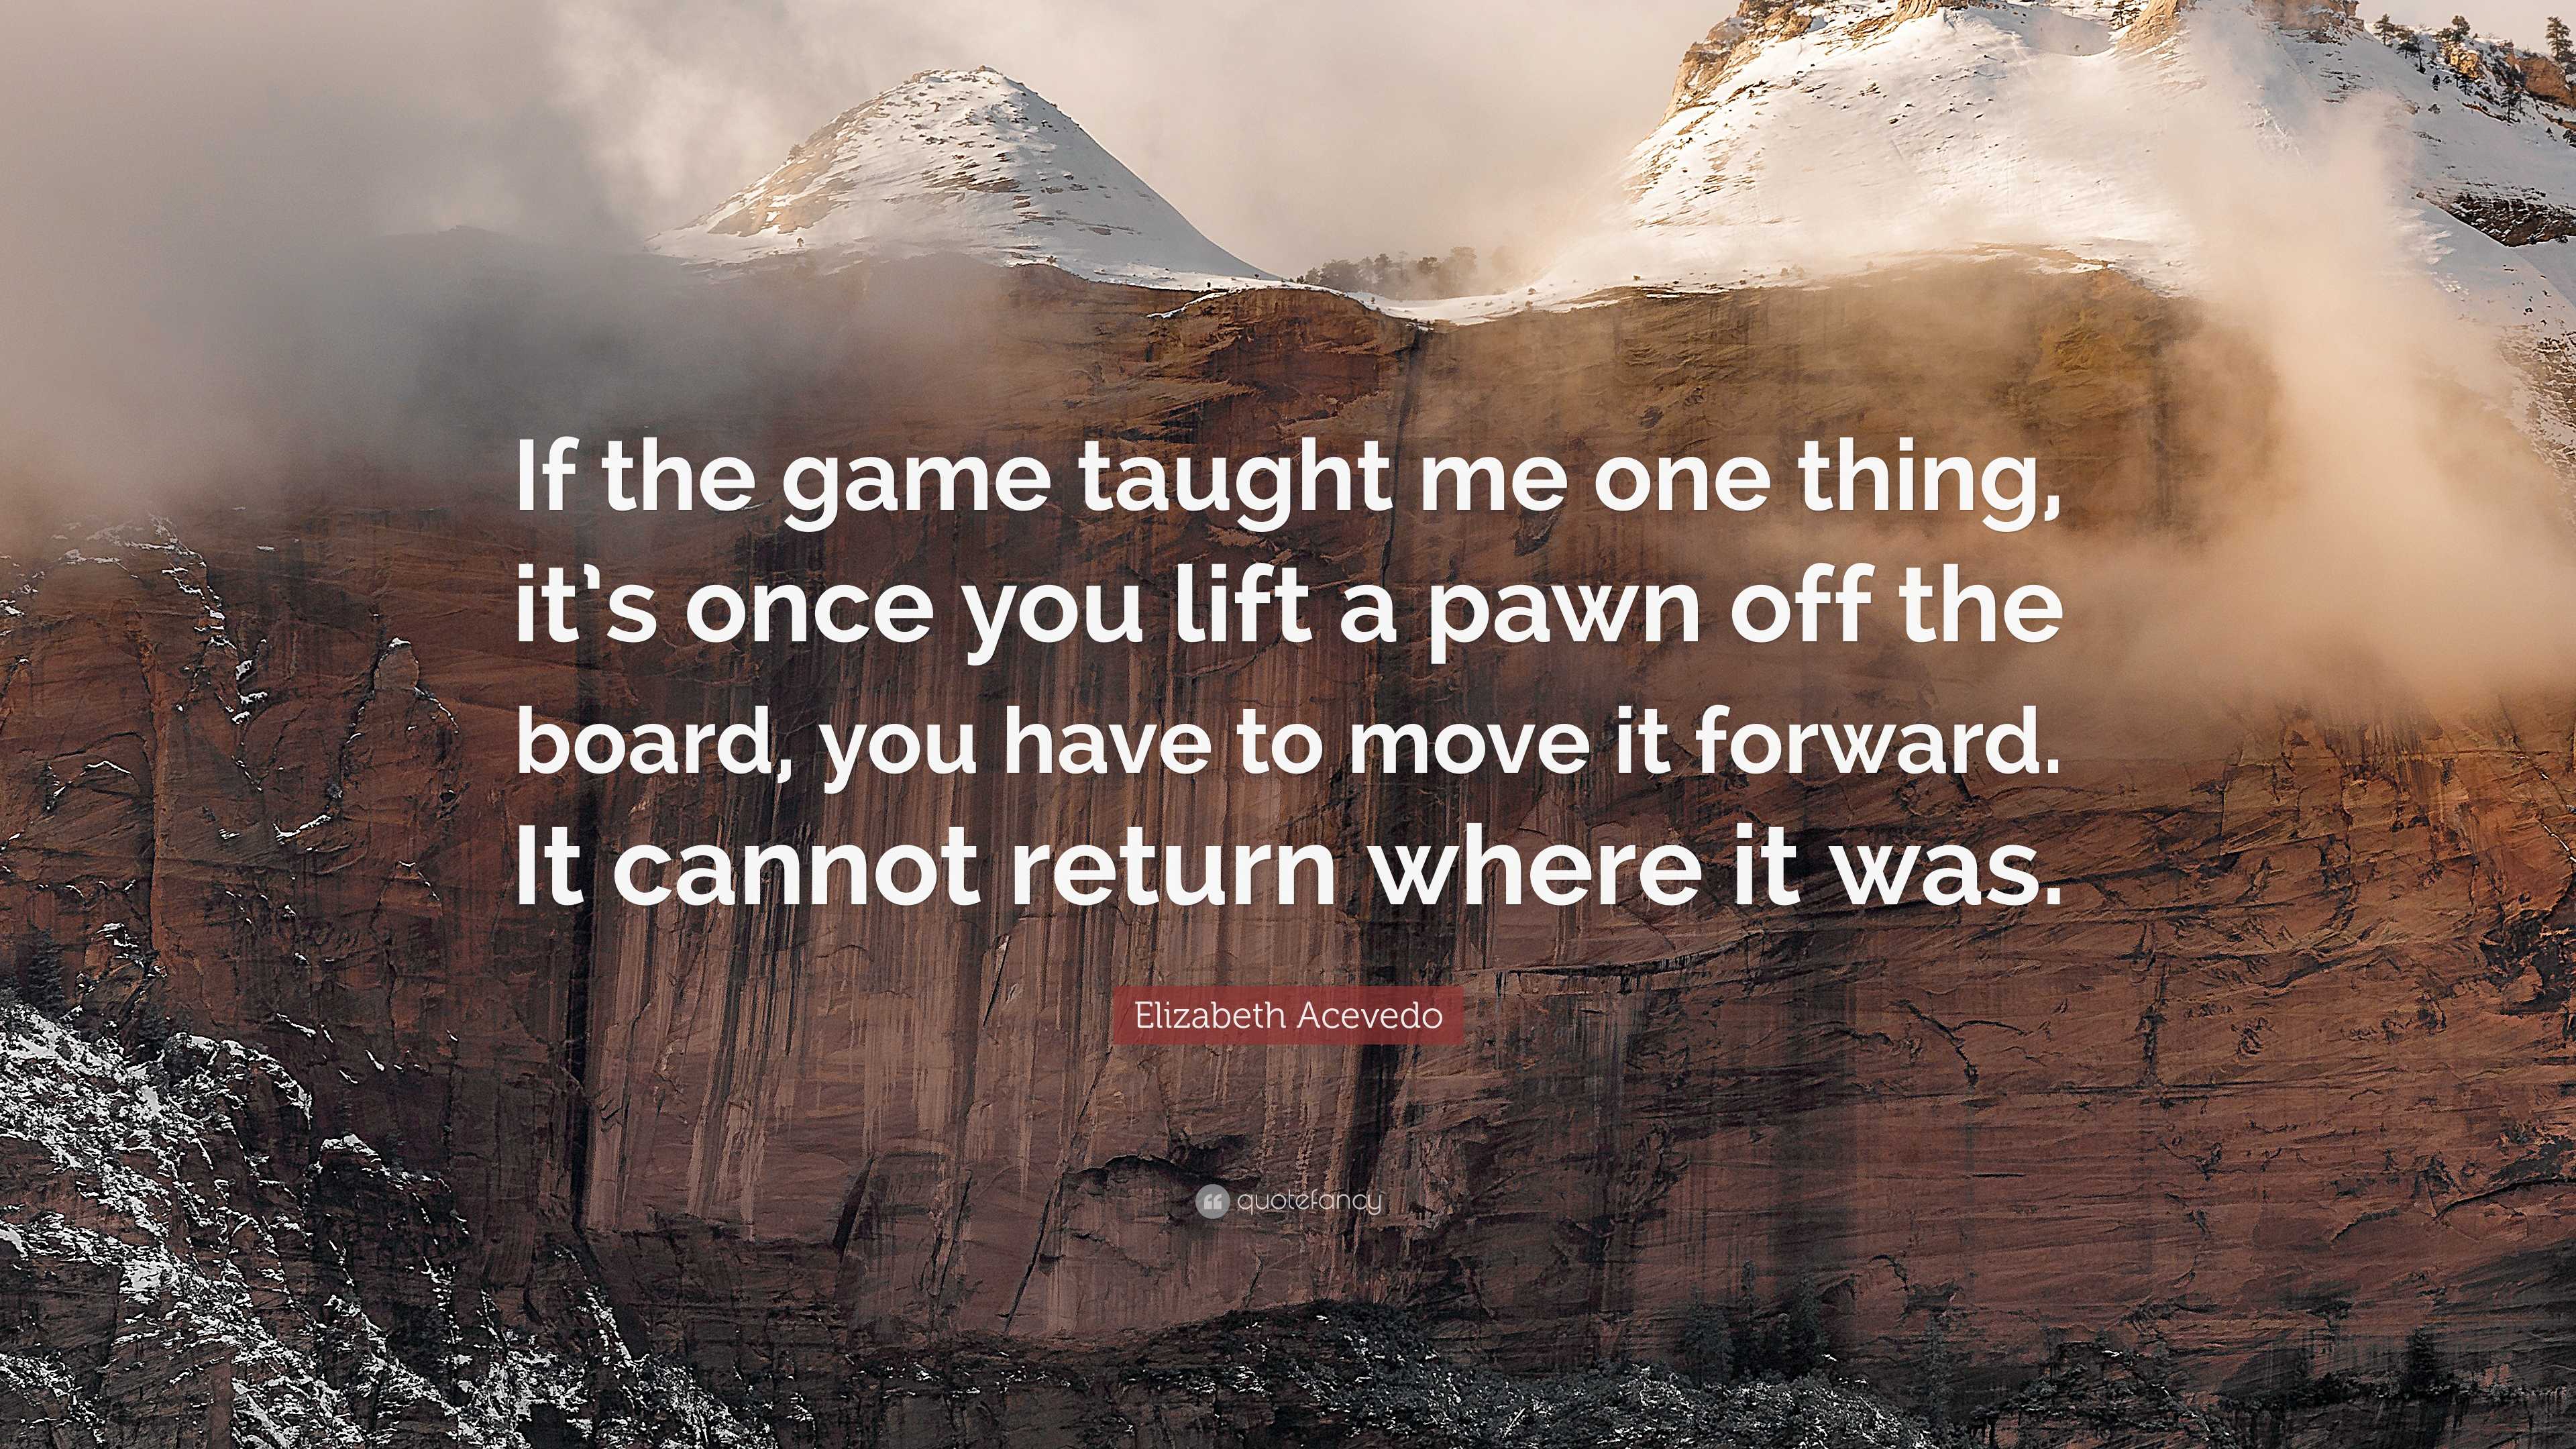 Elizabeth Acevedo Quote: “If the game taught me one thing, it's once you  lift a pawn off the board, you have to move it forward. It cannot return  ”